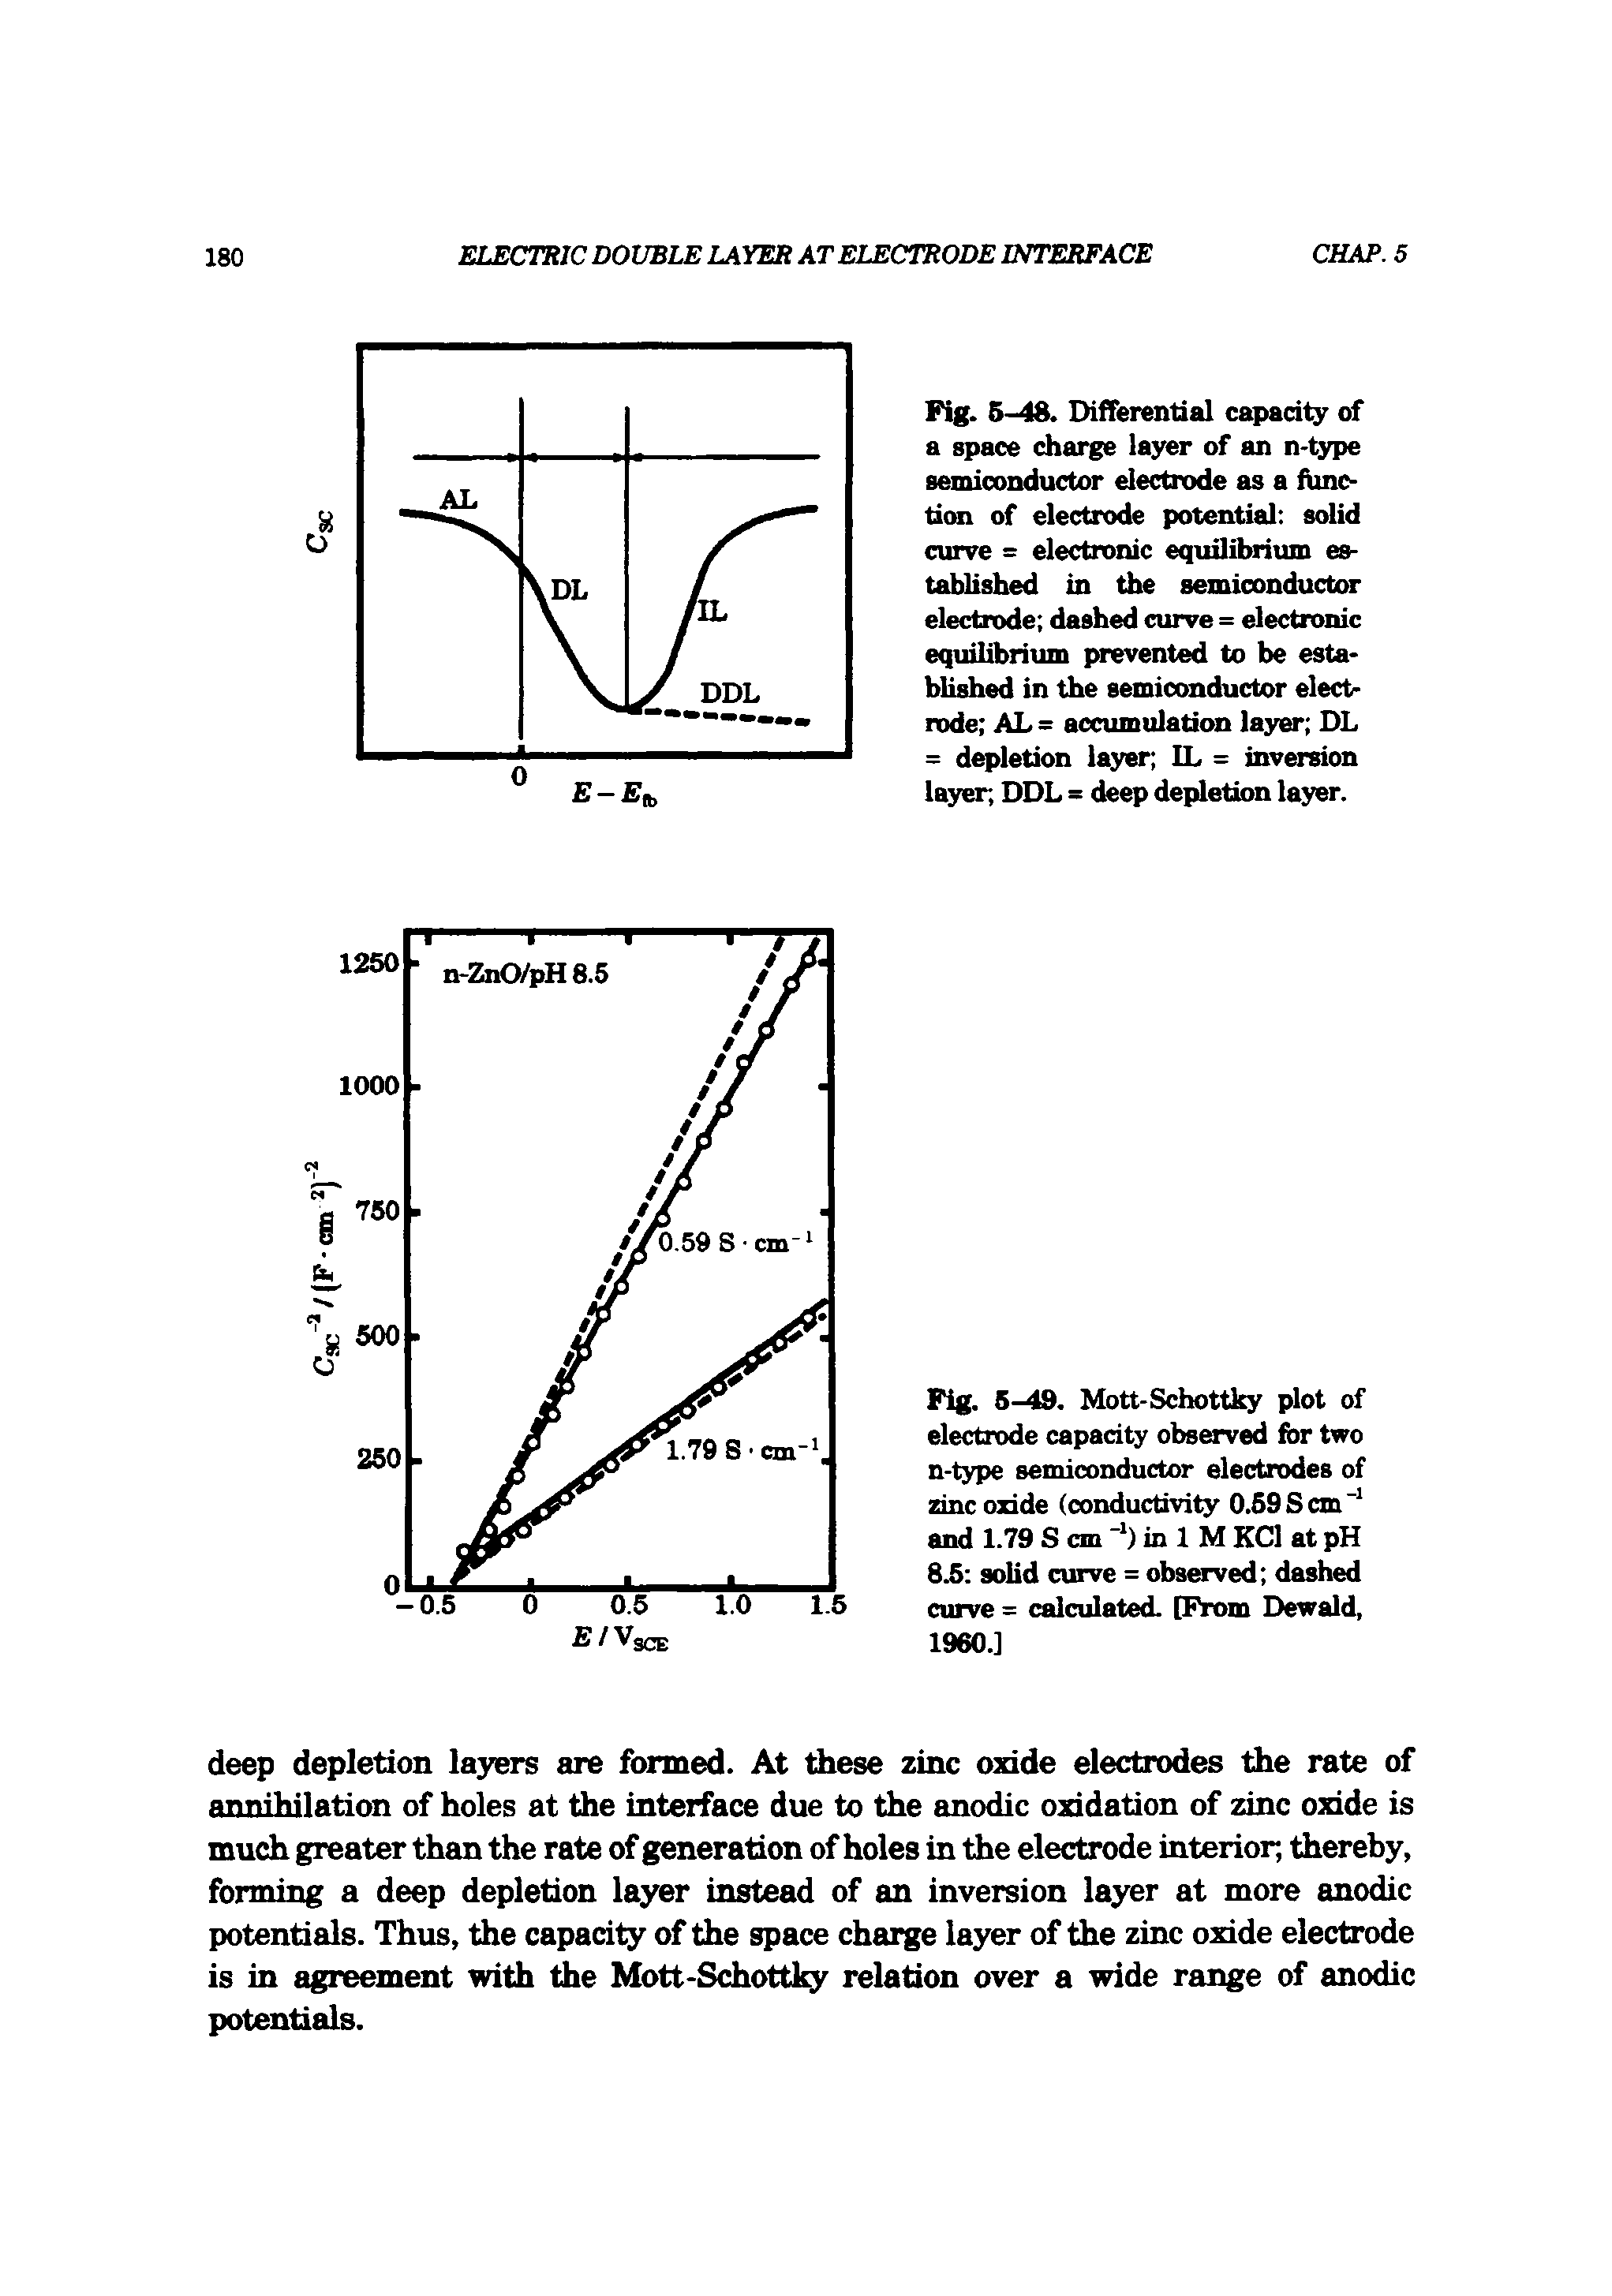 Fig. 5-49. Mott-Schottky plot of electrode capacity observed for two n-type semiconductor electrodes of zinc oxide (conductivity 0.59 S cm and 1.79 S cm in 1 M KCl at pH 8.5 solid curve = observed dashed curve = calculated. [From Dewald, I960.]...